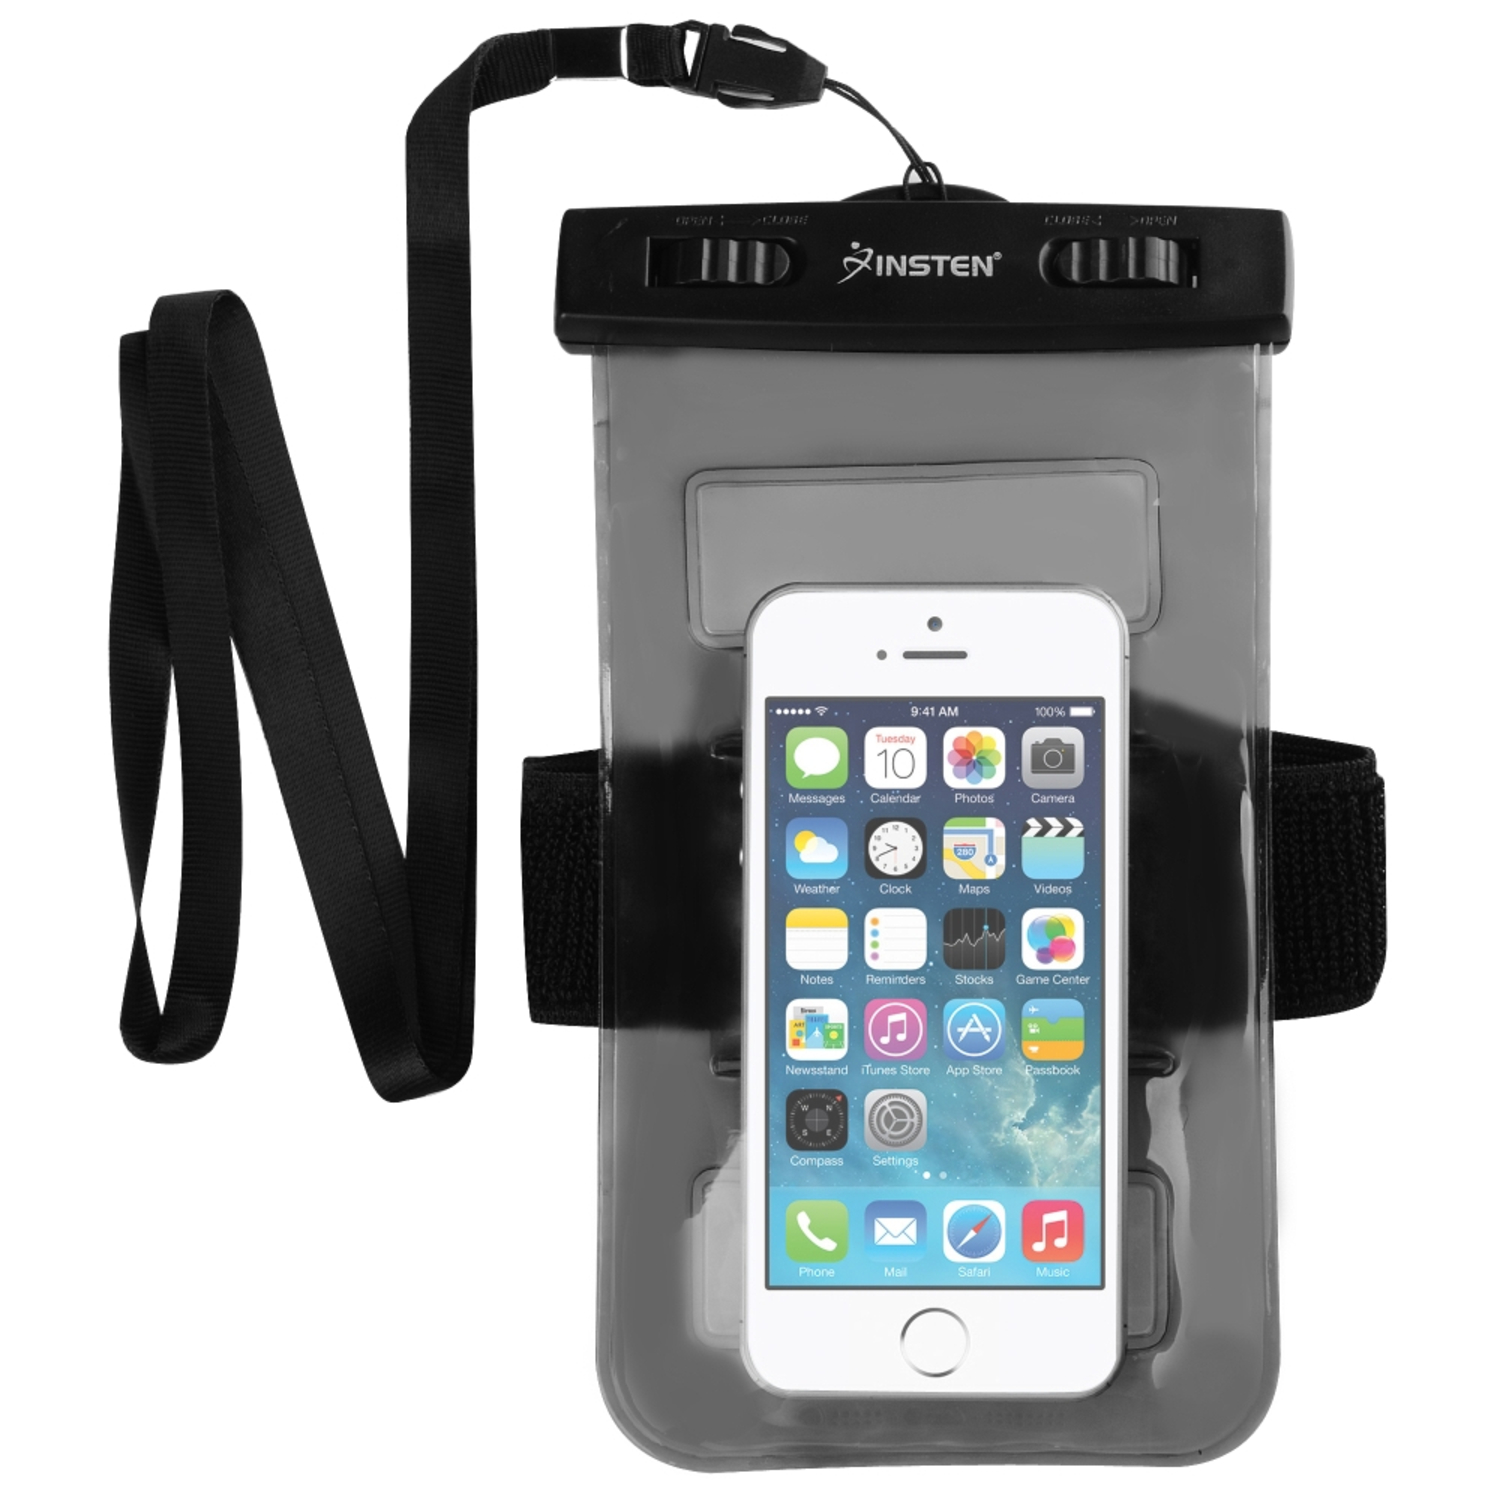 Insten 807831 Universal Waterproof Case Dry Bag Pouch for Cell Phone with Armband, Black